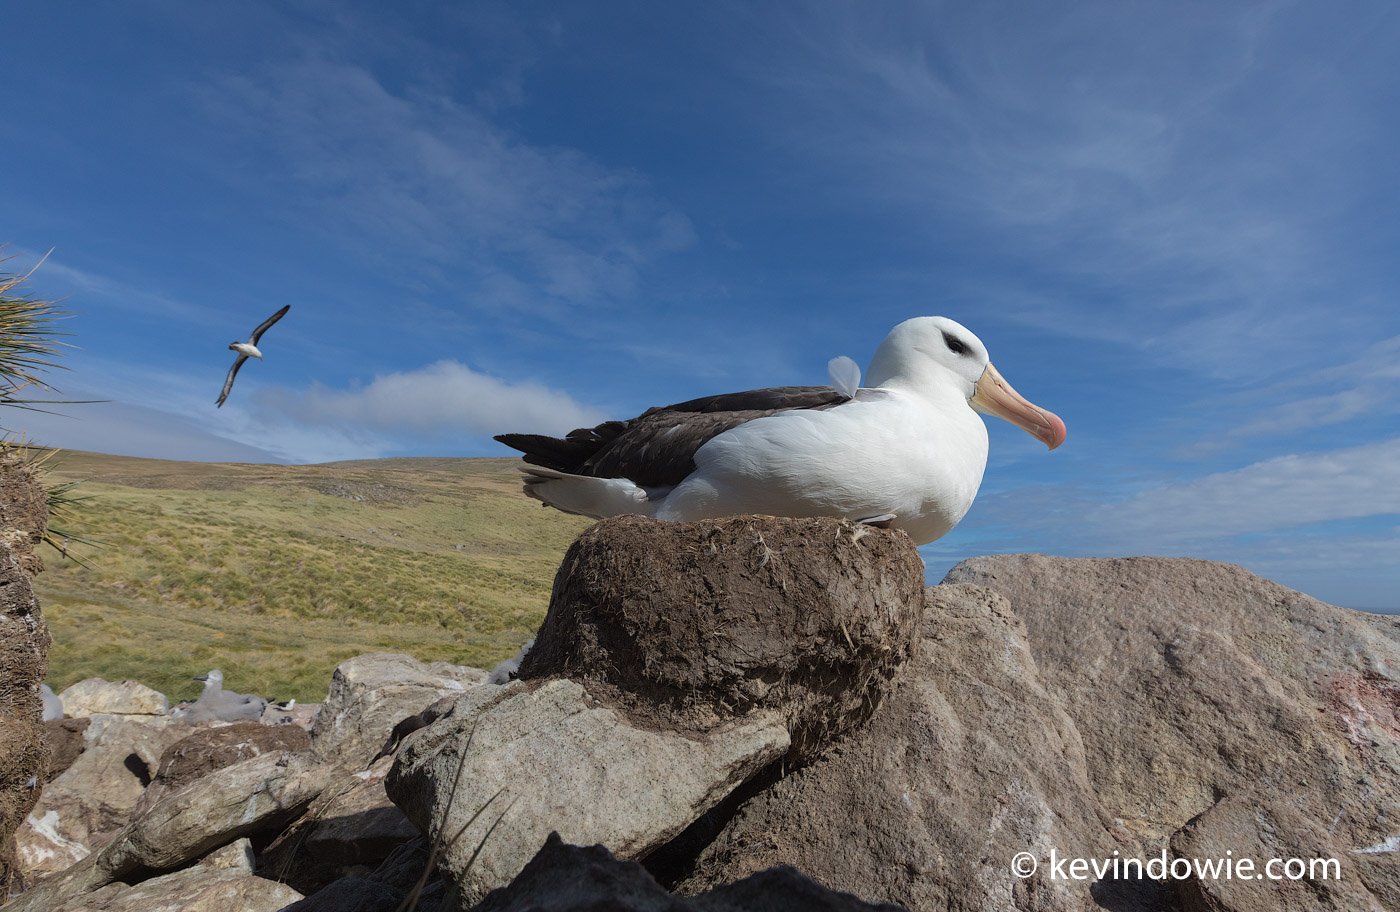 The albatross use raised nests constructed from mud